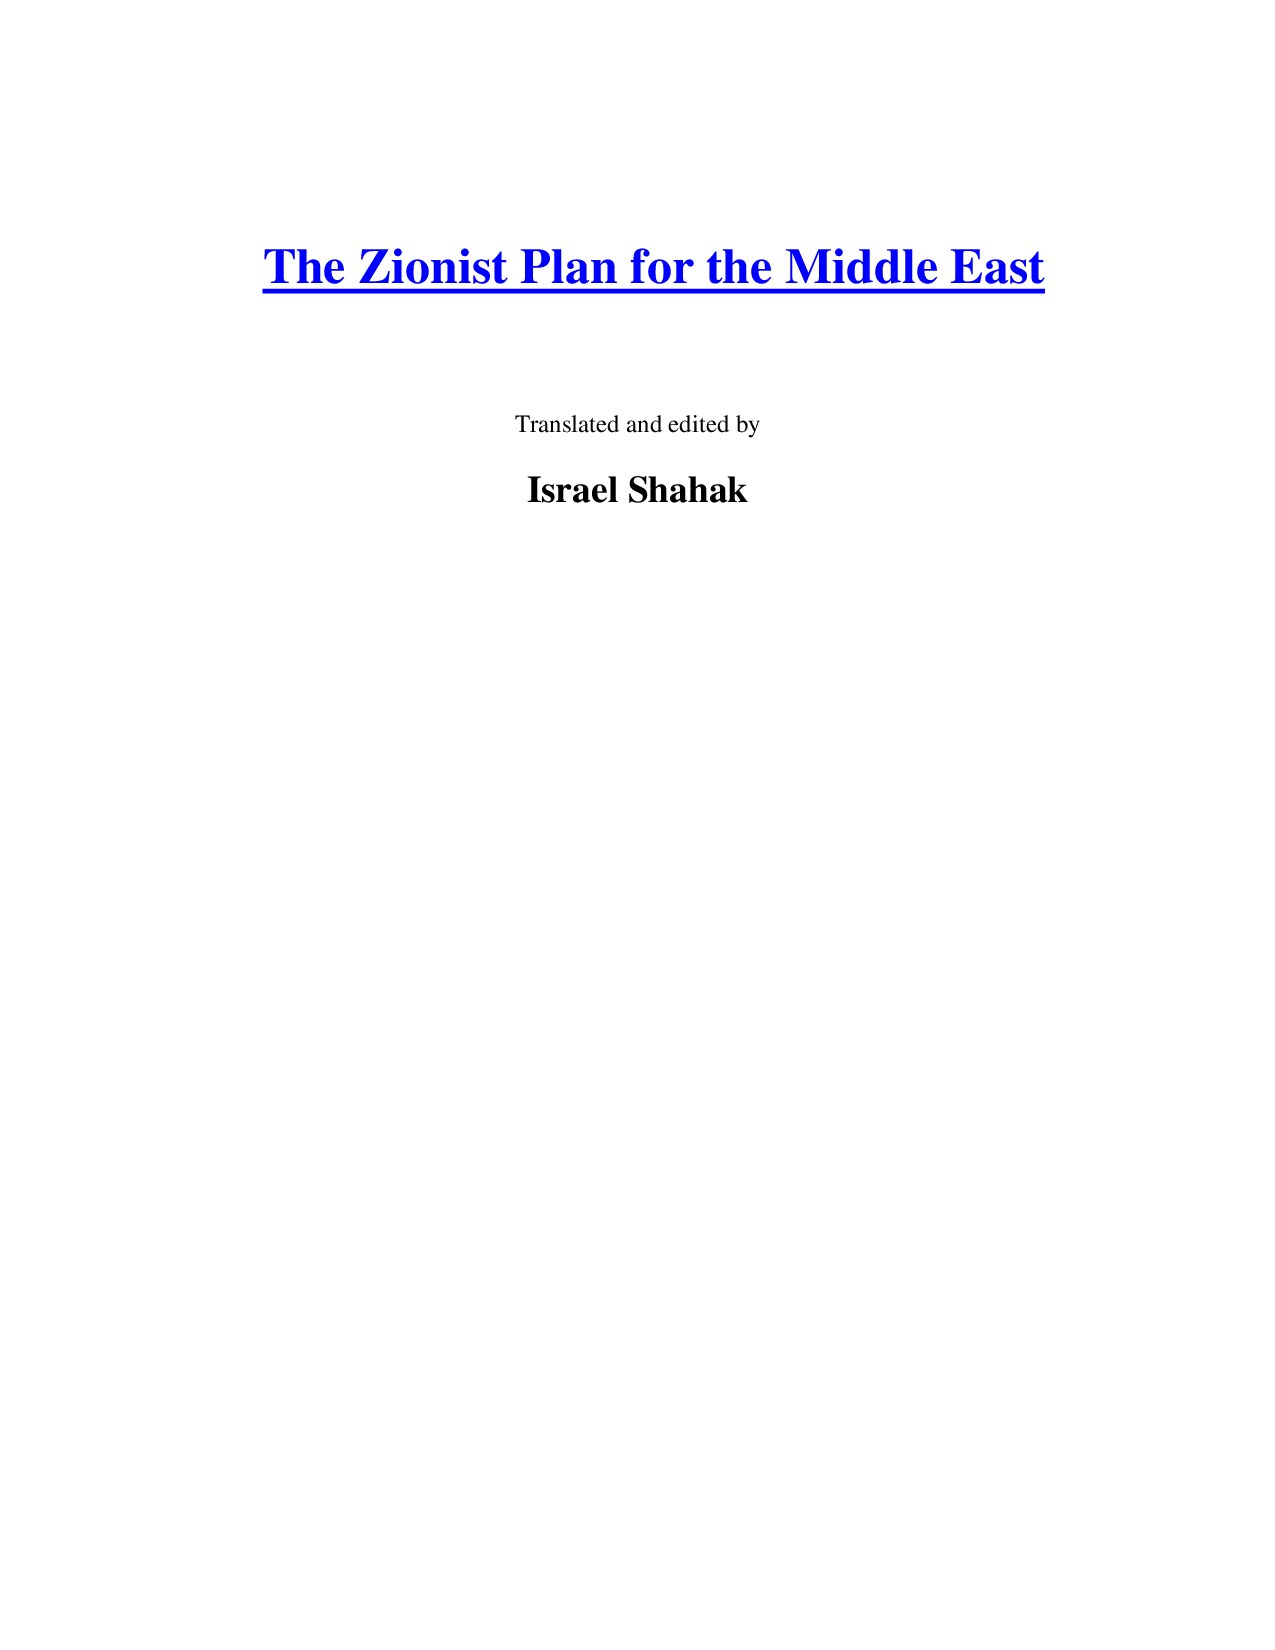 Microsoft Word - The Zionist Plan for the Middle Eas1.doc